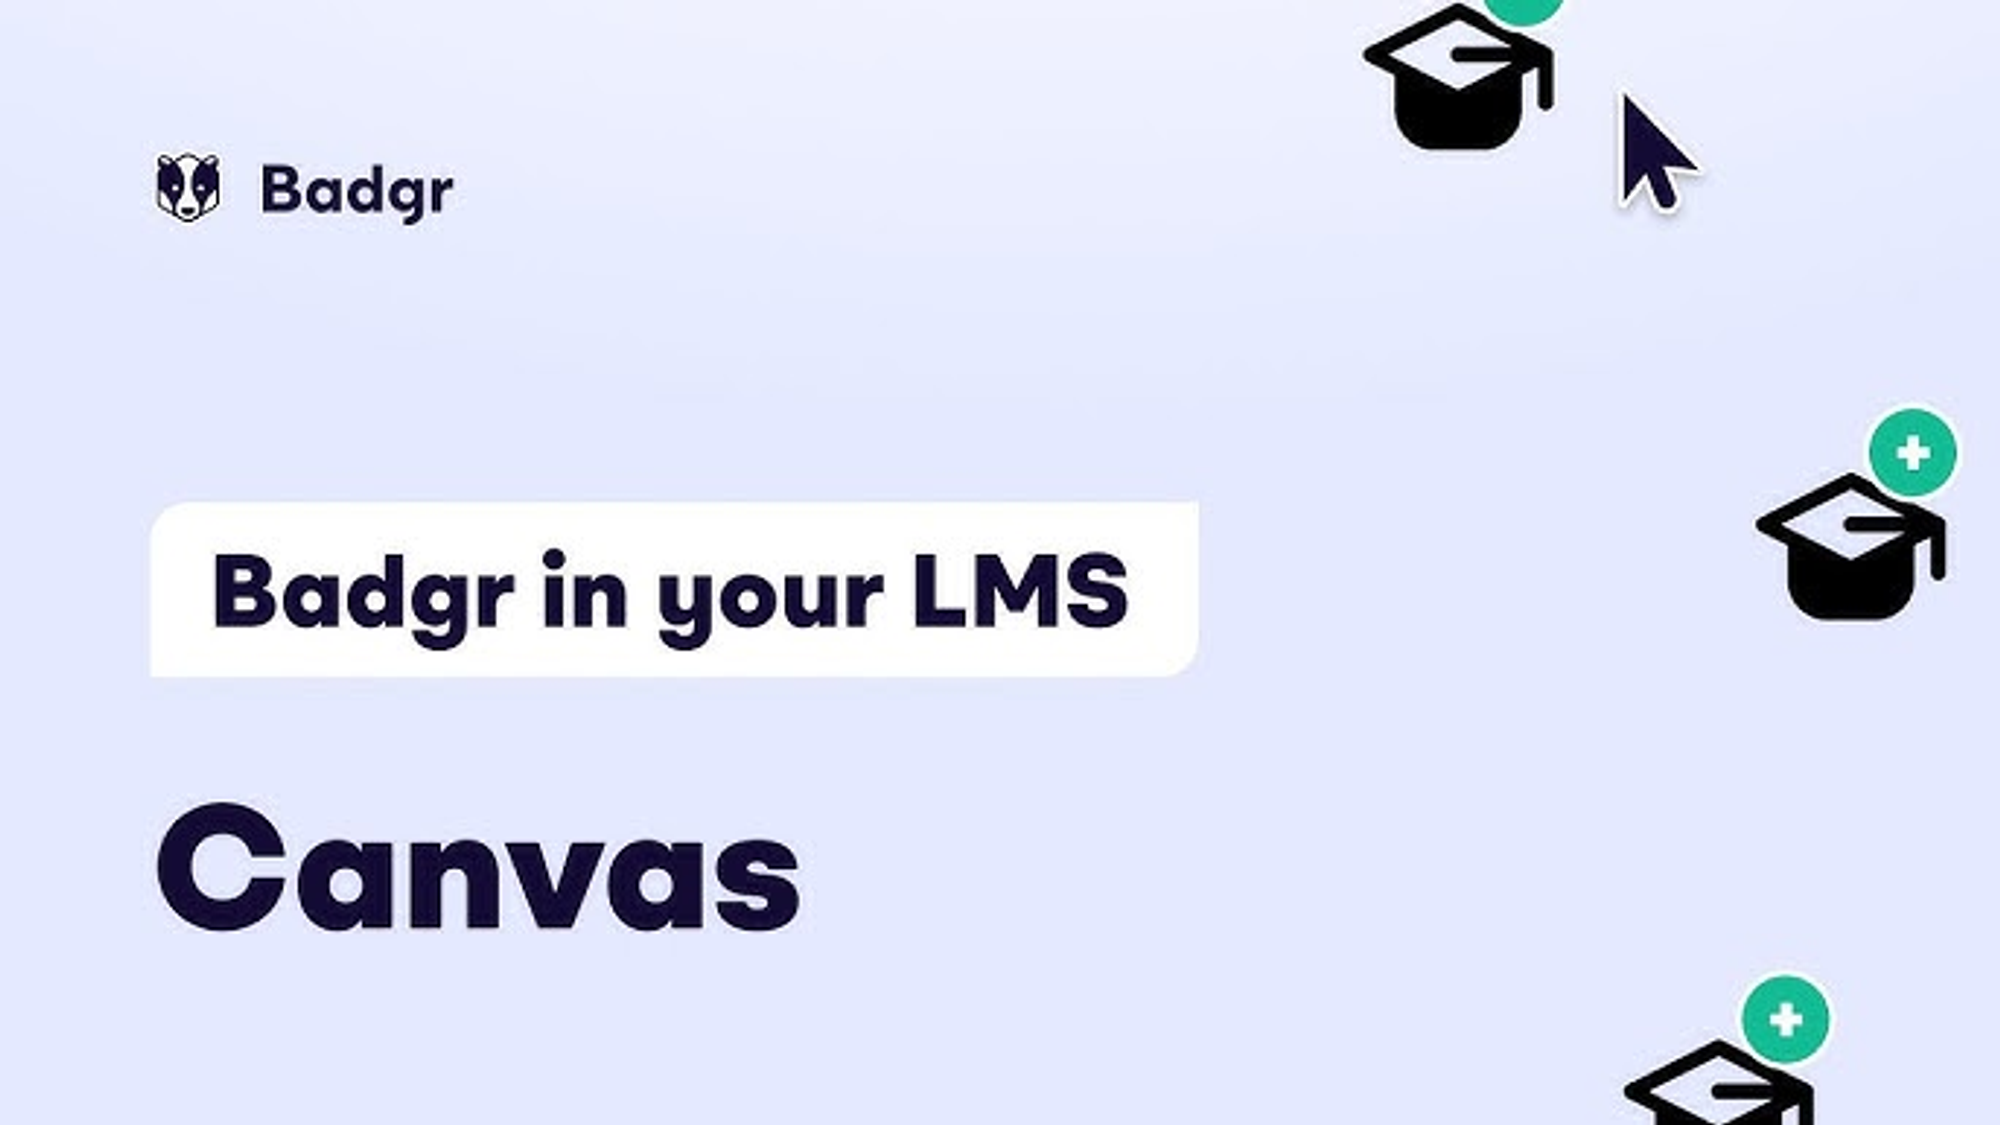                                                      Integration of Badgr with Canvas LMS